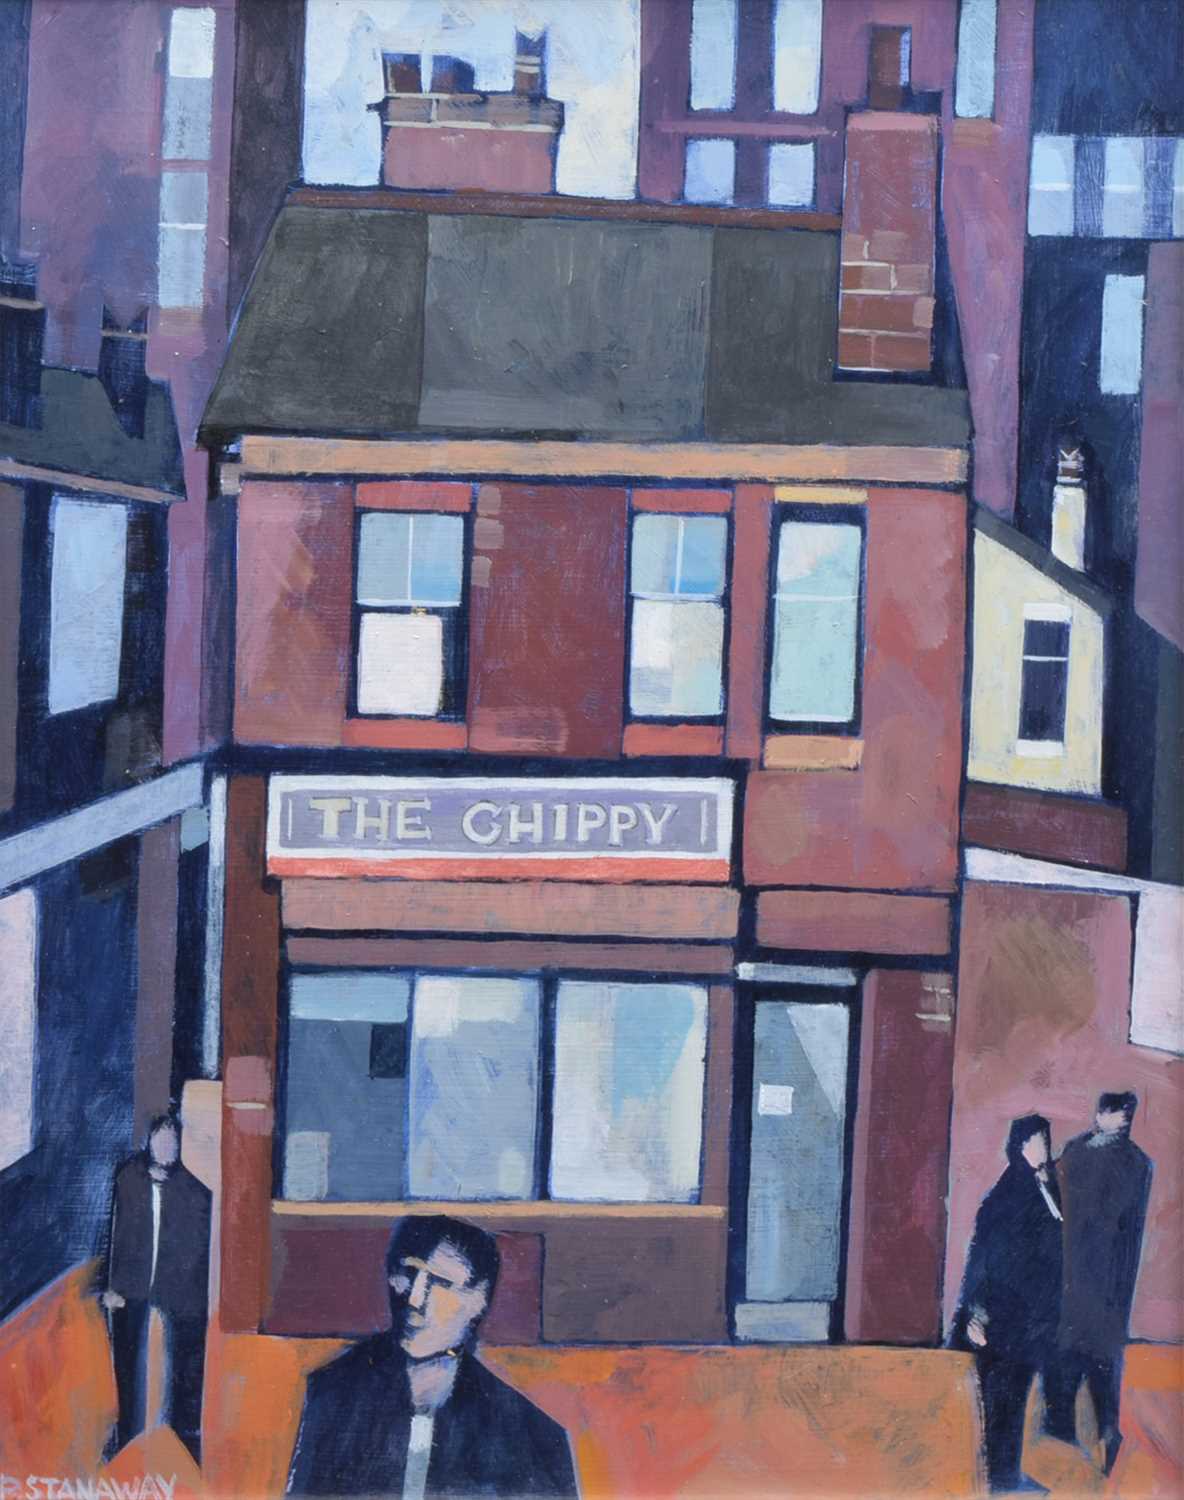 Lot 395 - Peter Stanaway, "The Chippy, Miles Platting", acrylic.